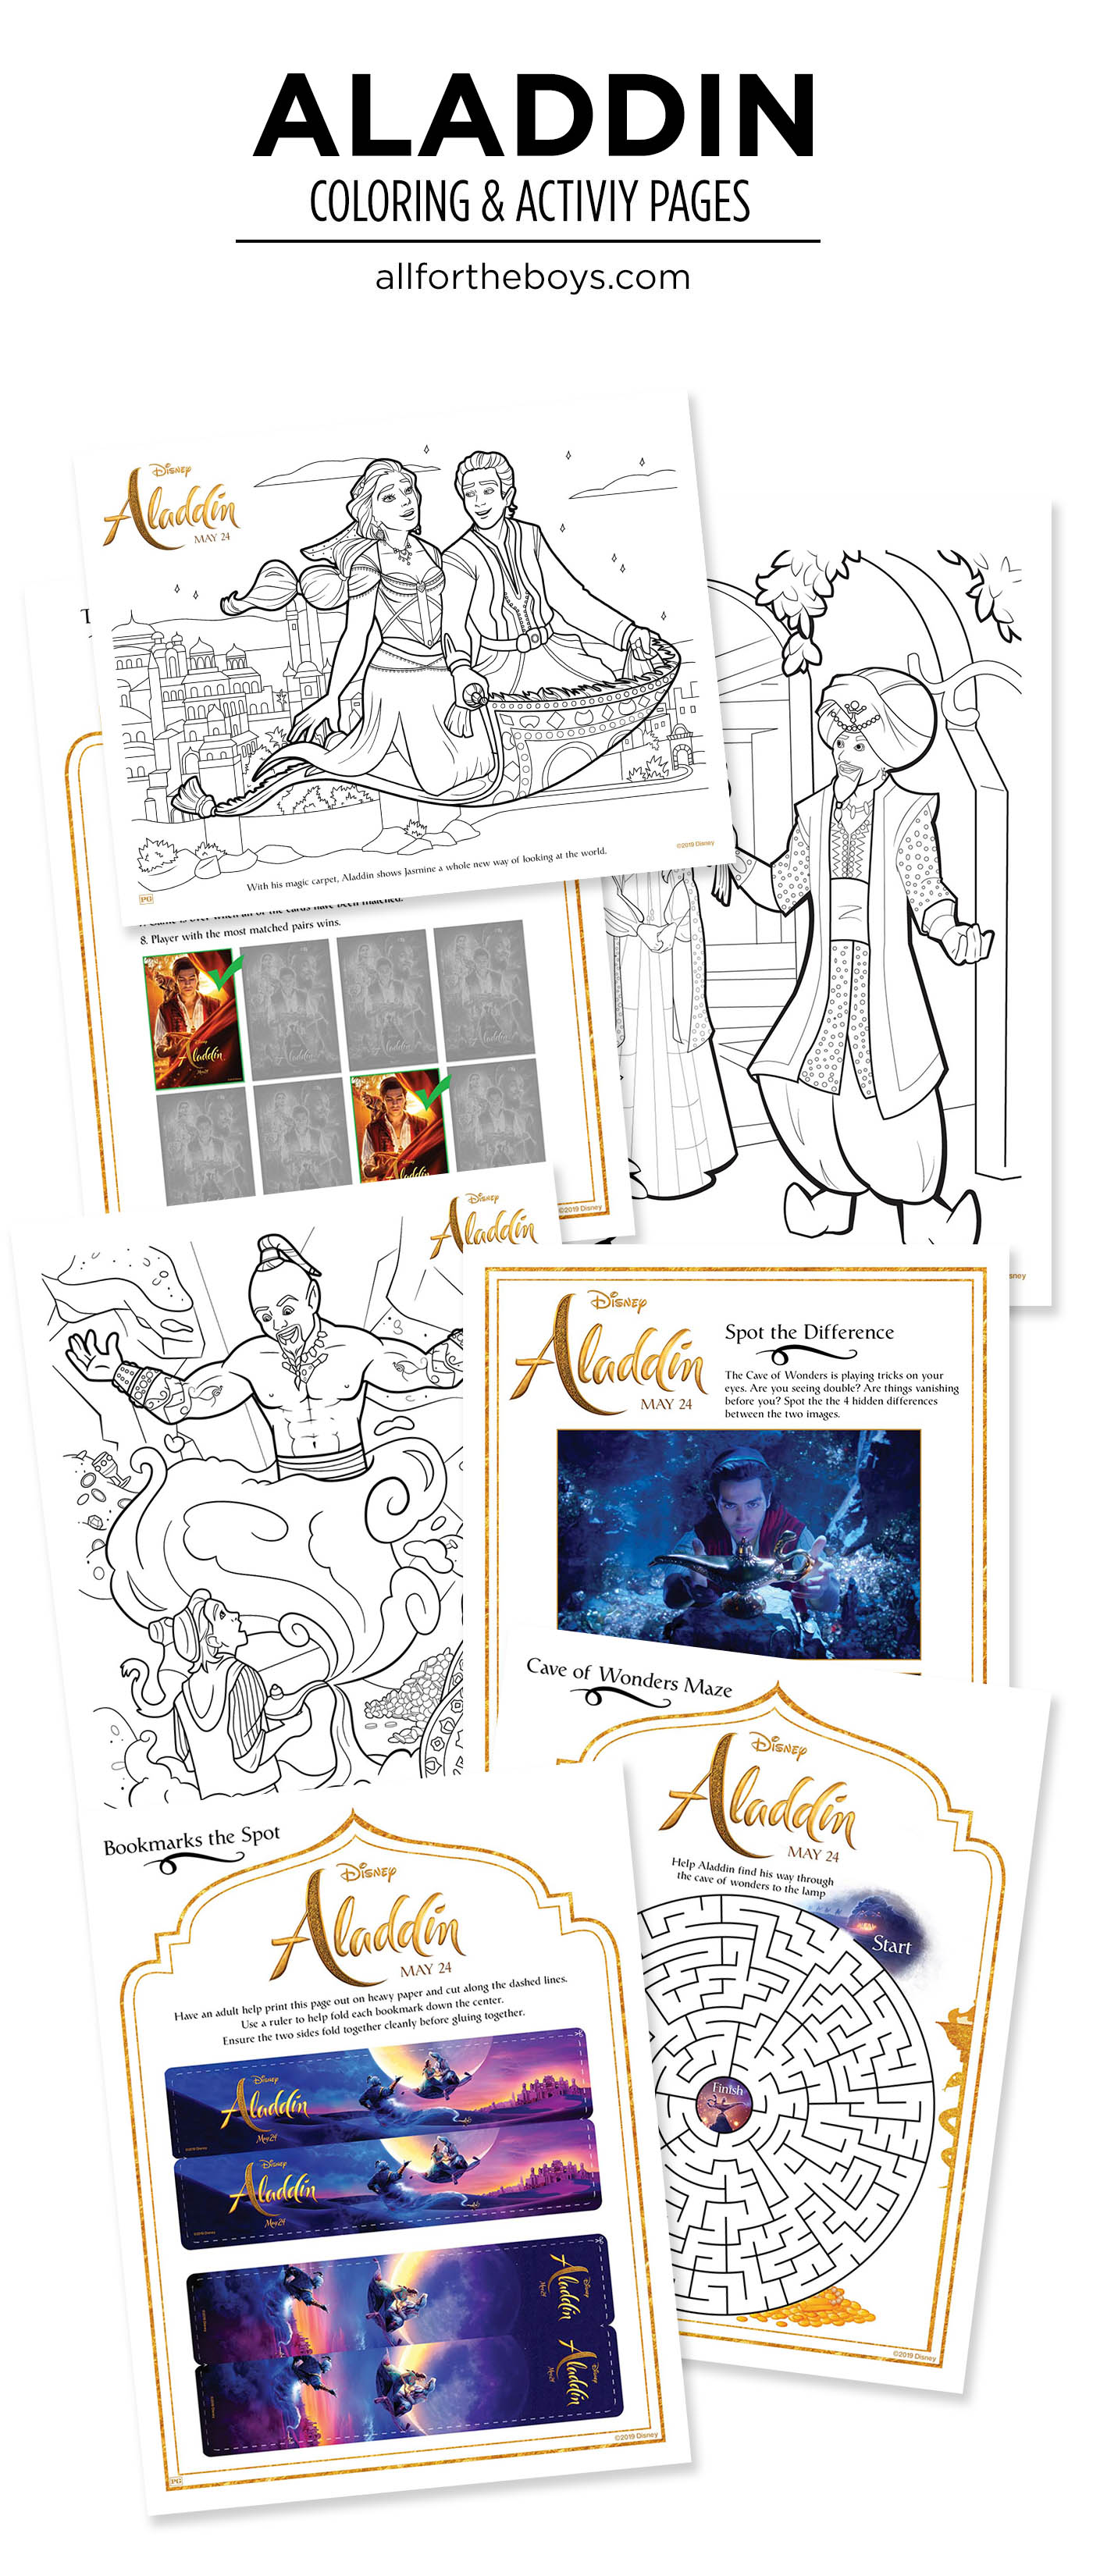 Aladdin Printable coloring pages and activities